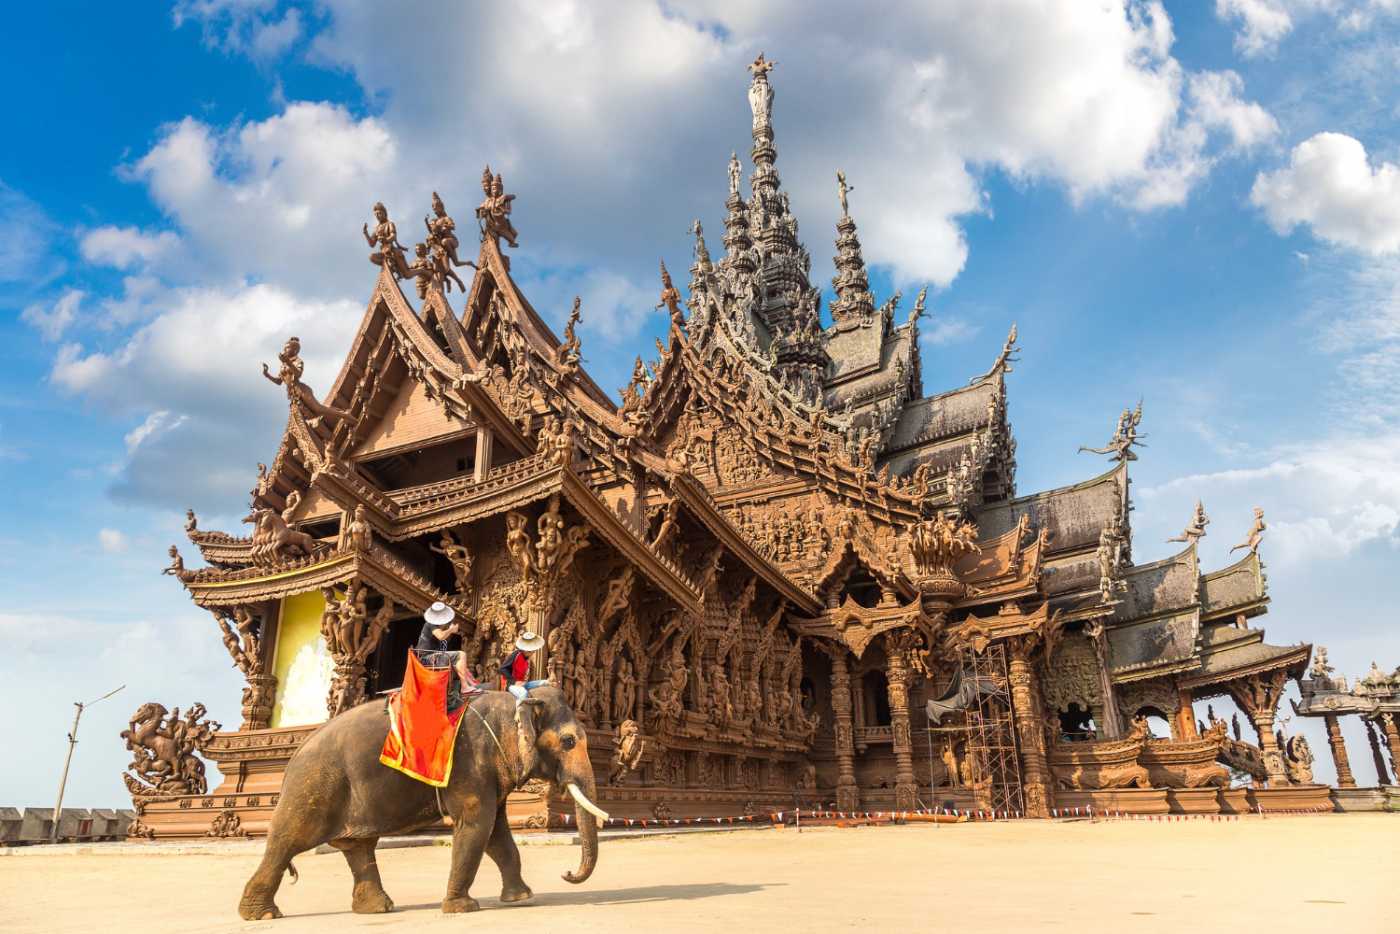 Striking image of Pattaya's Sanctuary of Truth, showcasing its intricate wooden carvings and majestic architecture